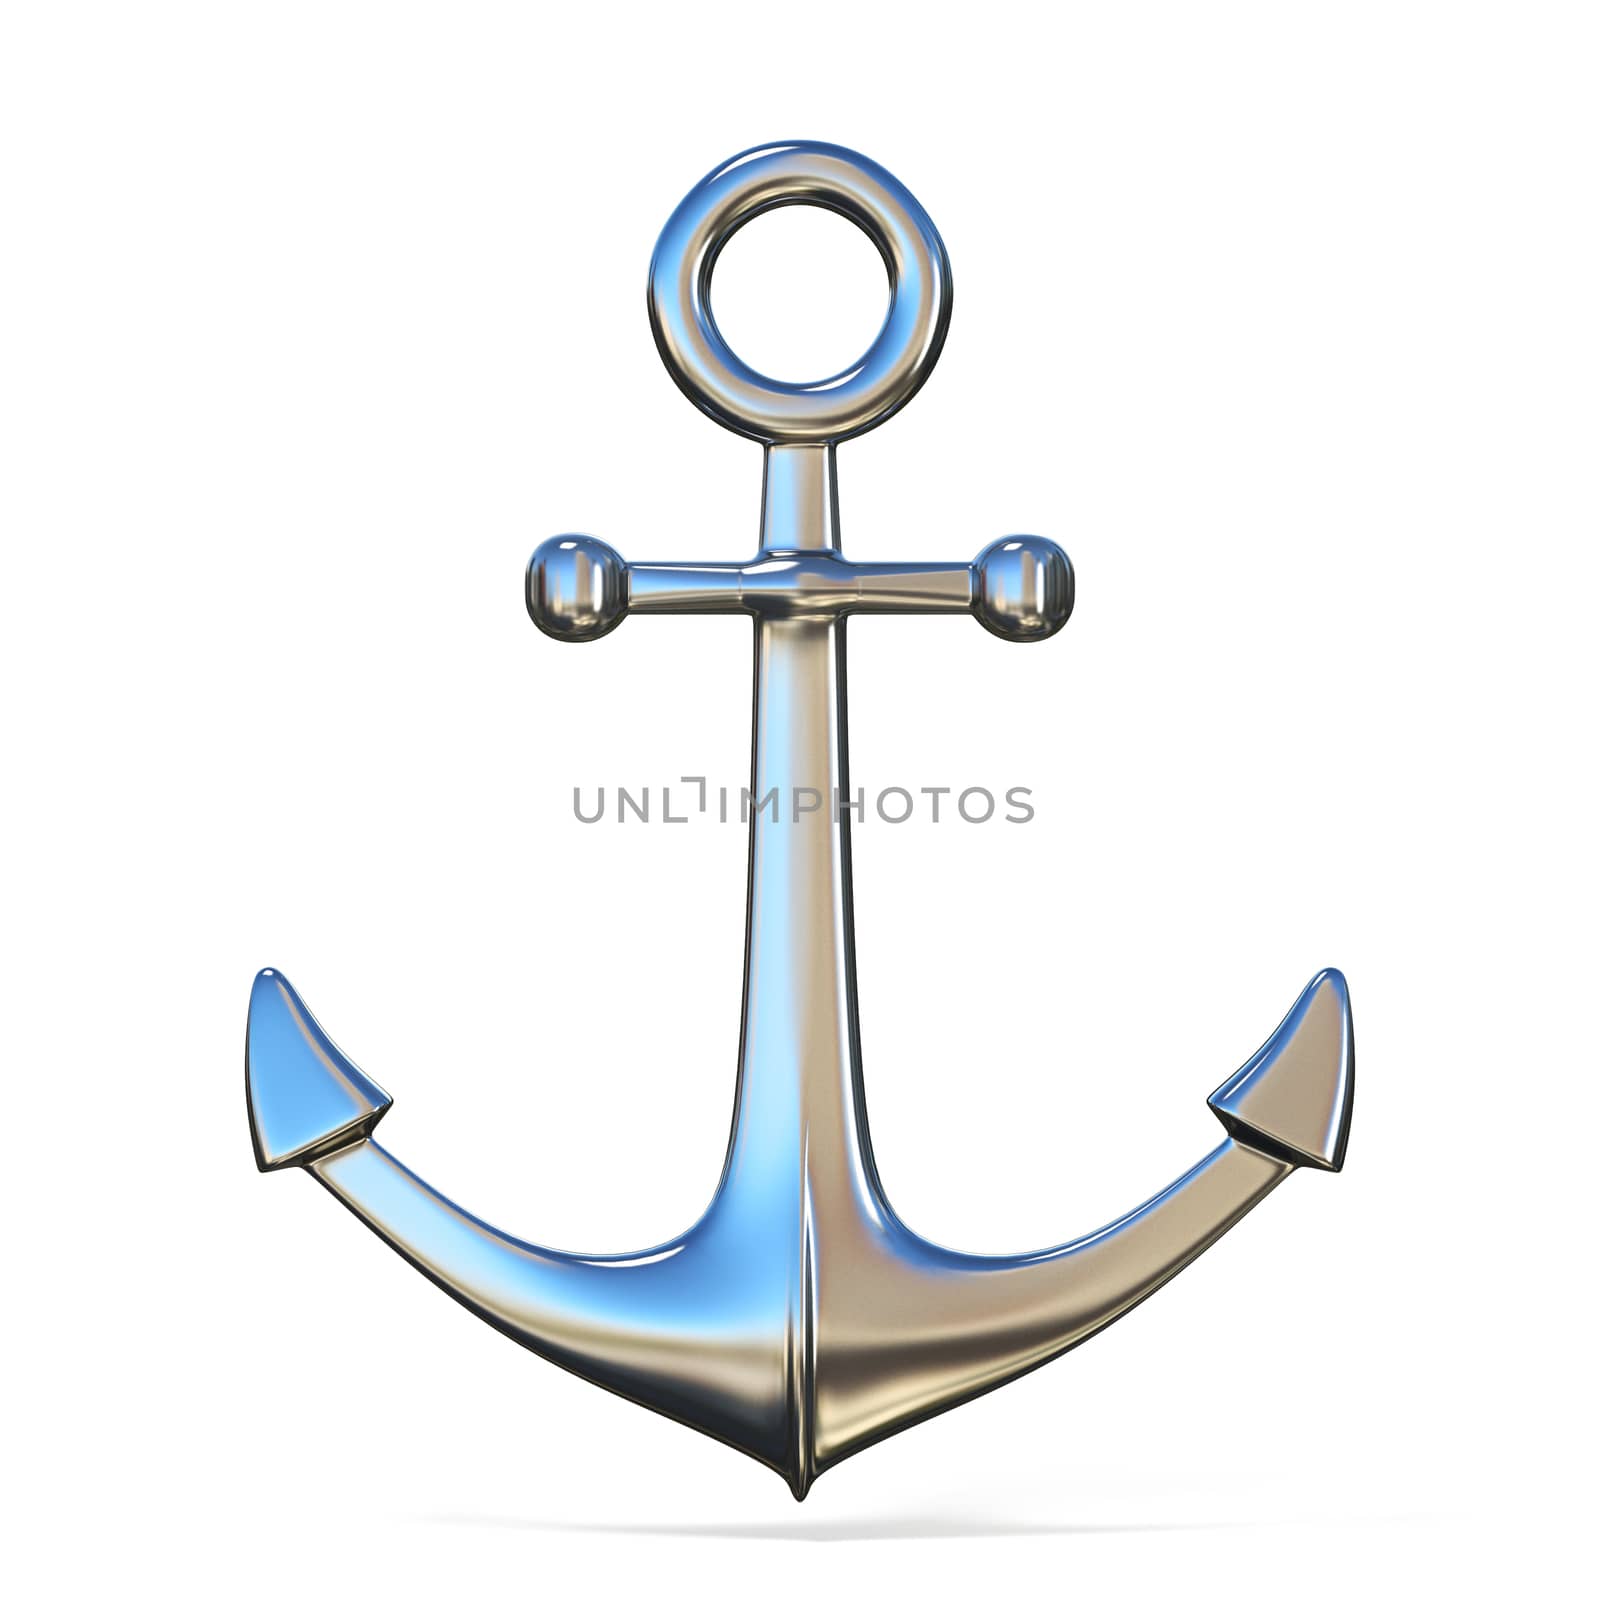 Steel anchor 3D rendering illustration on white background by djmilic